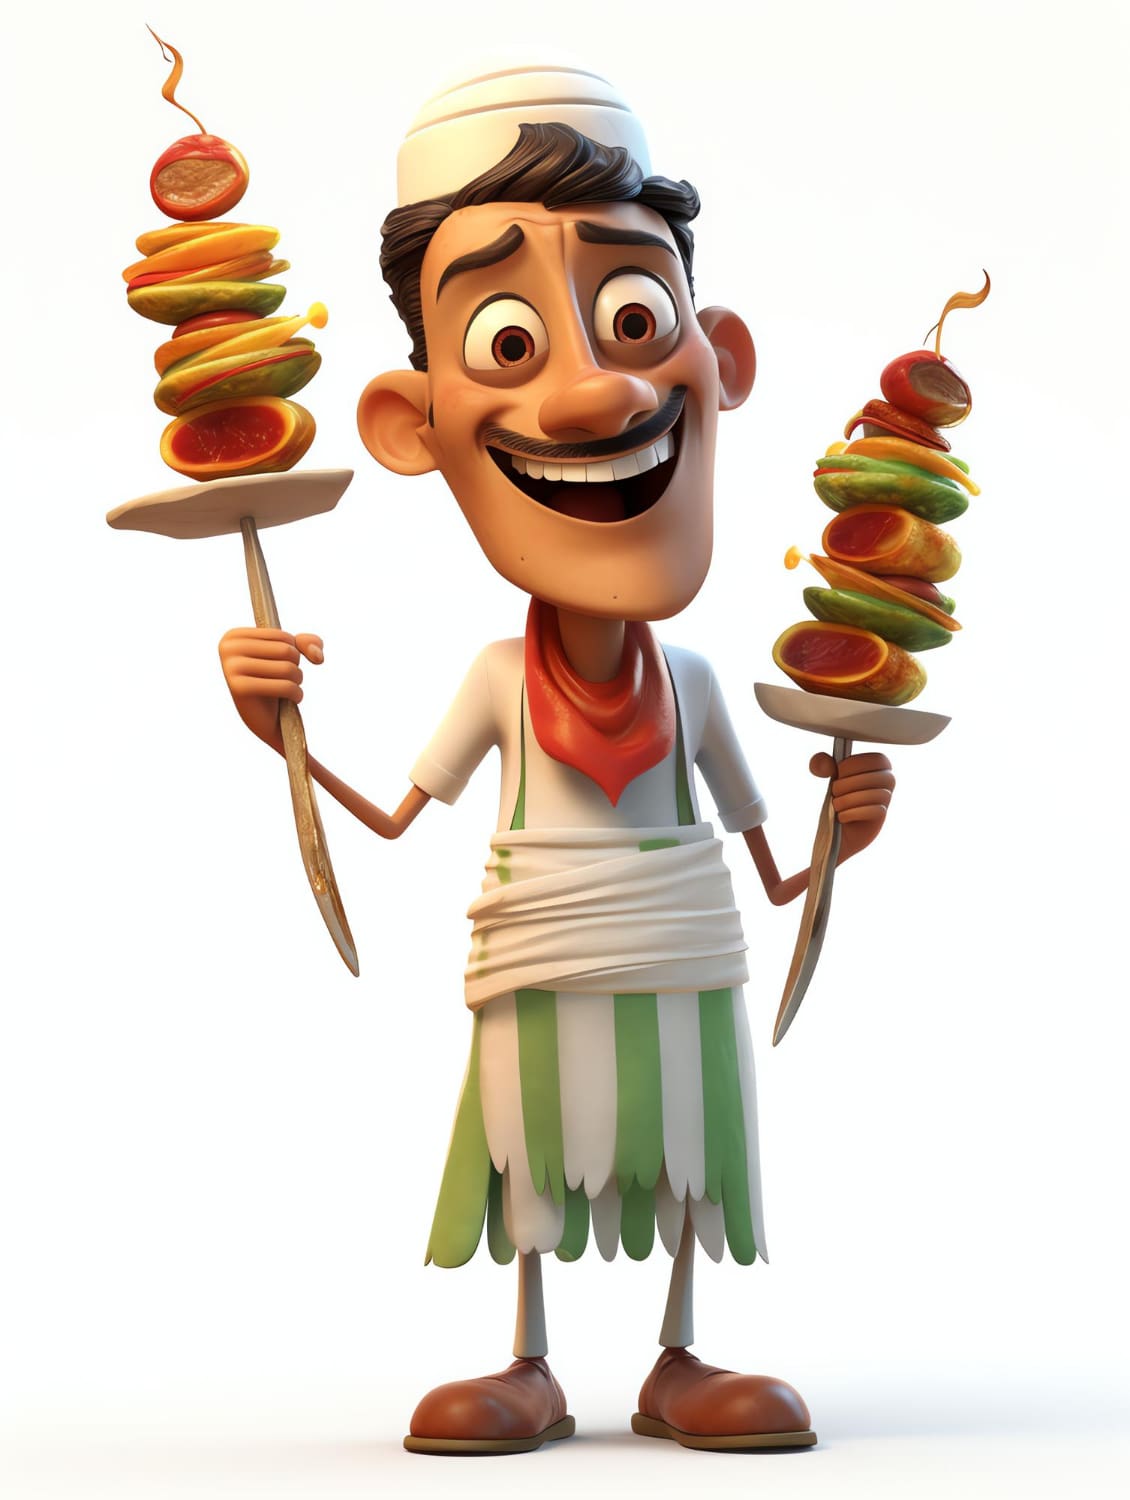 Cartoon graphic of a satisfied kebab skewer with a chef’s hat and sunglasses waving goodbye on a grill-themed background.